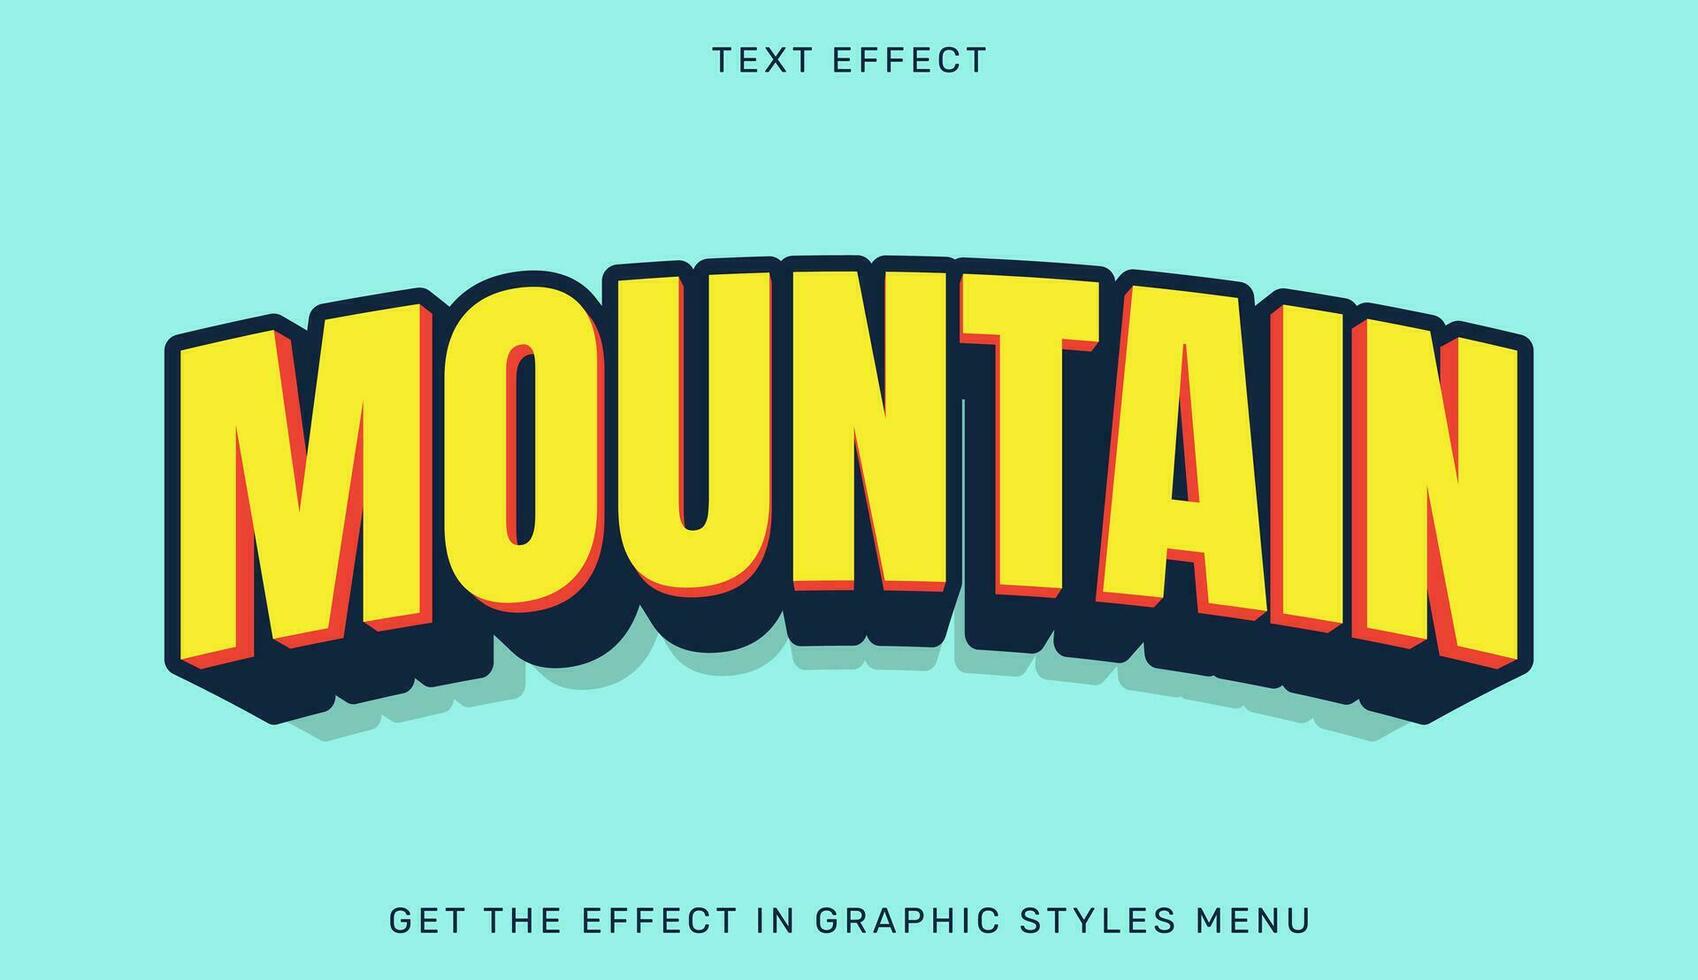 Mountain editable text effect in 3d style. Text emblem for advertising, branding, business logo vector